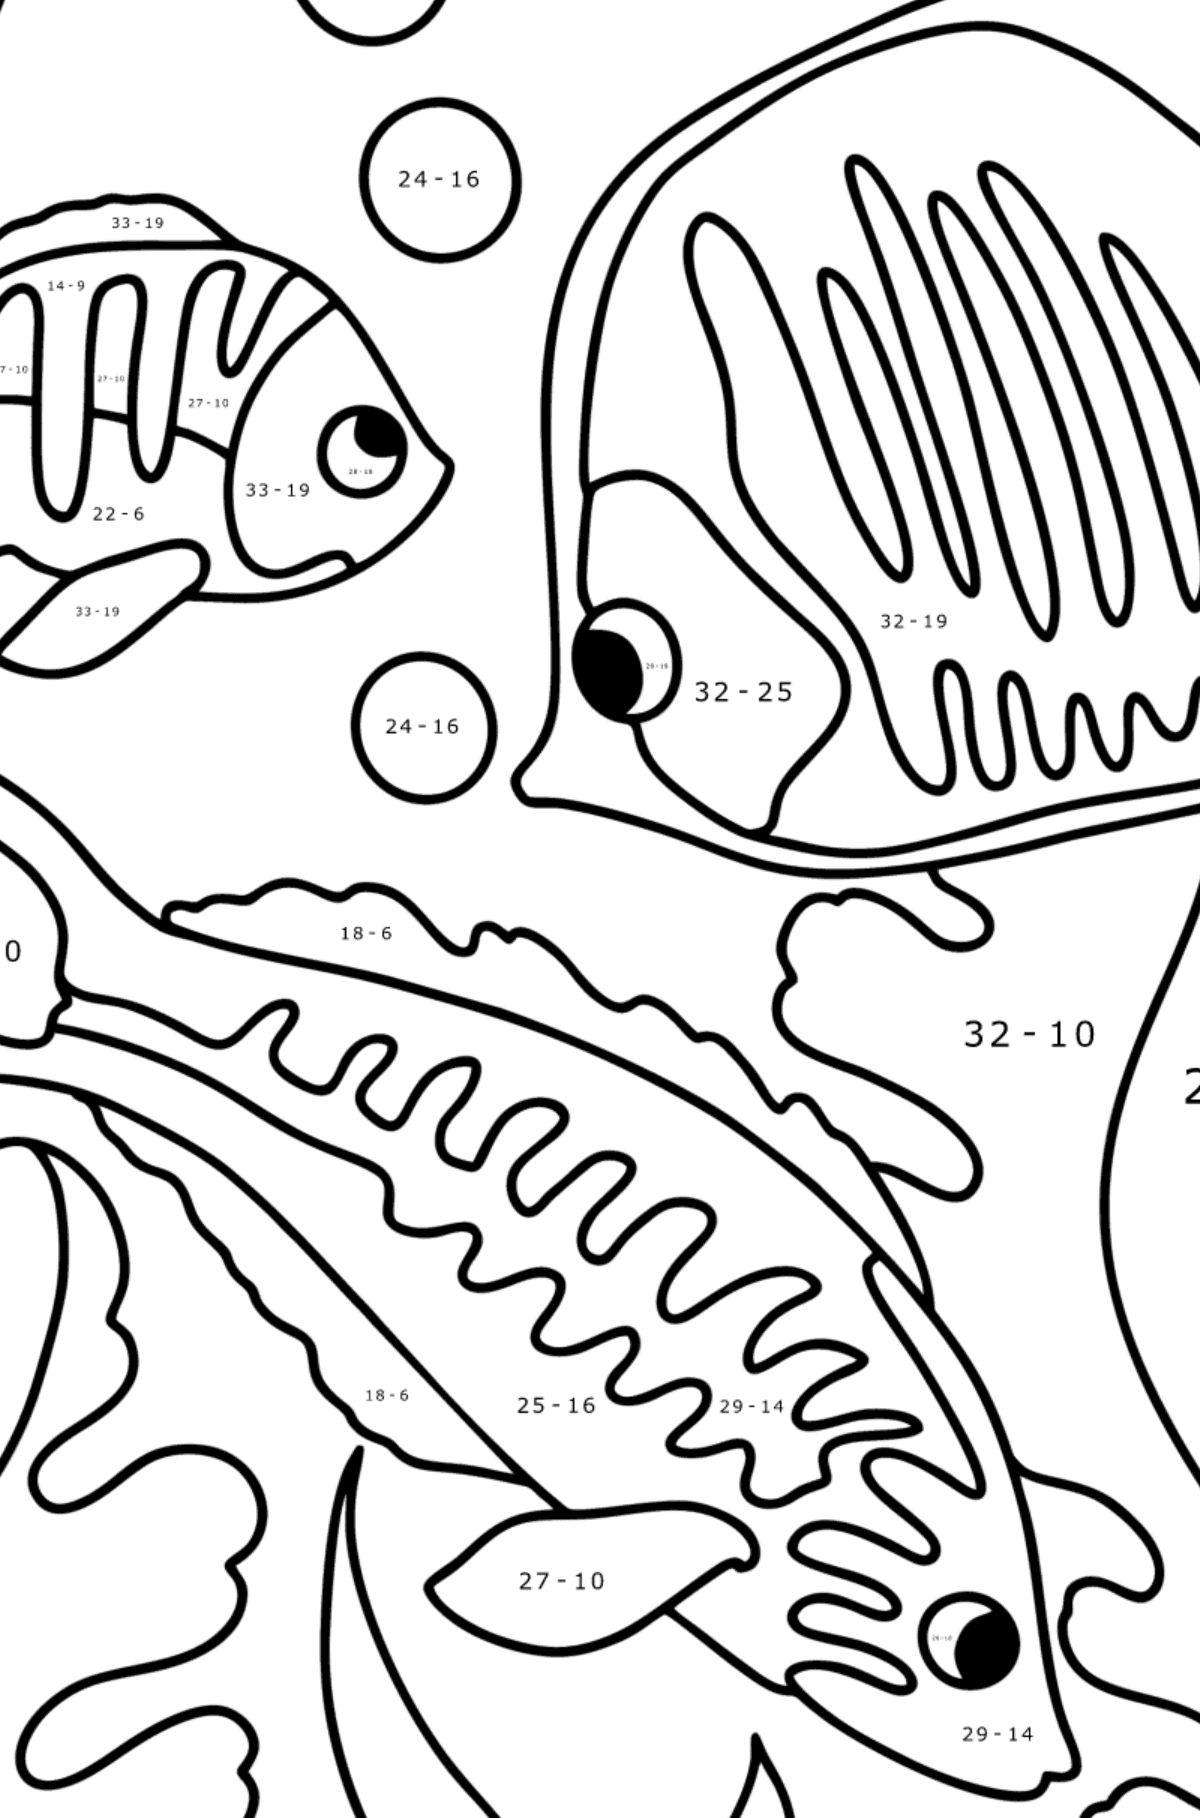 Fish in the sea coloring page - Math Coloring - Subtraction for Kids